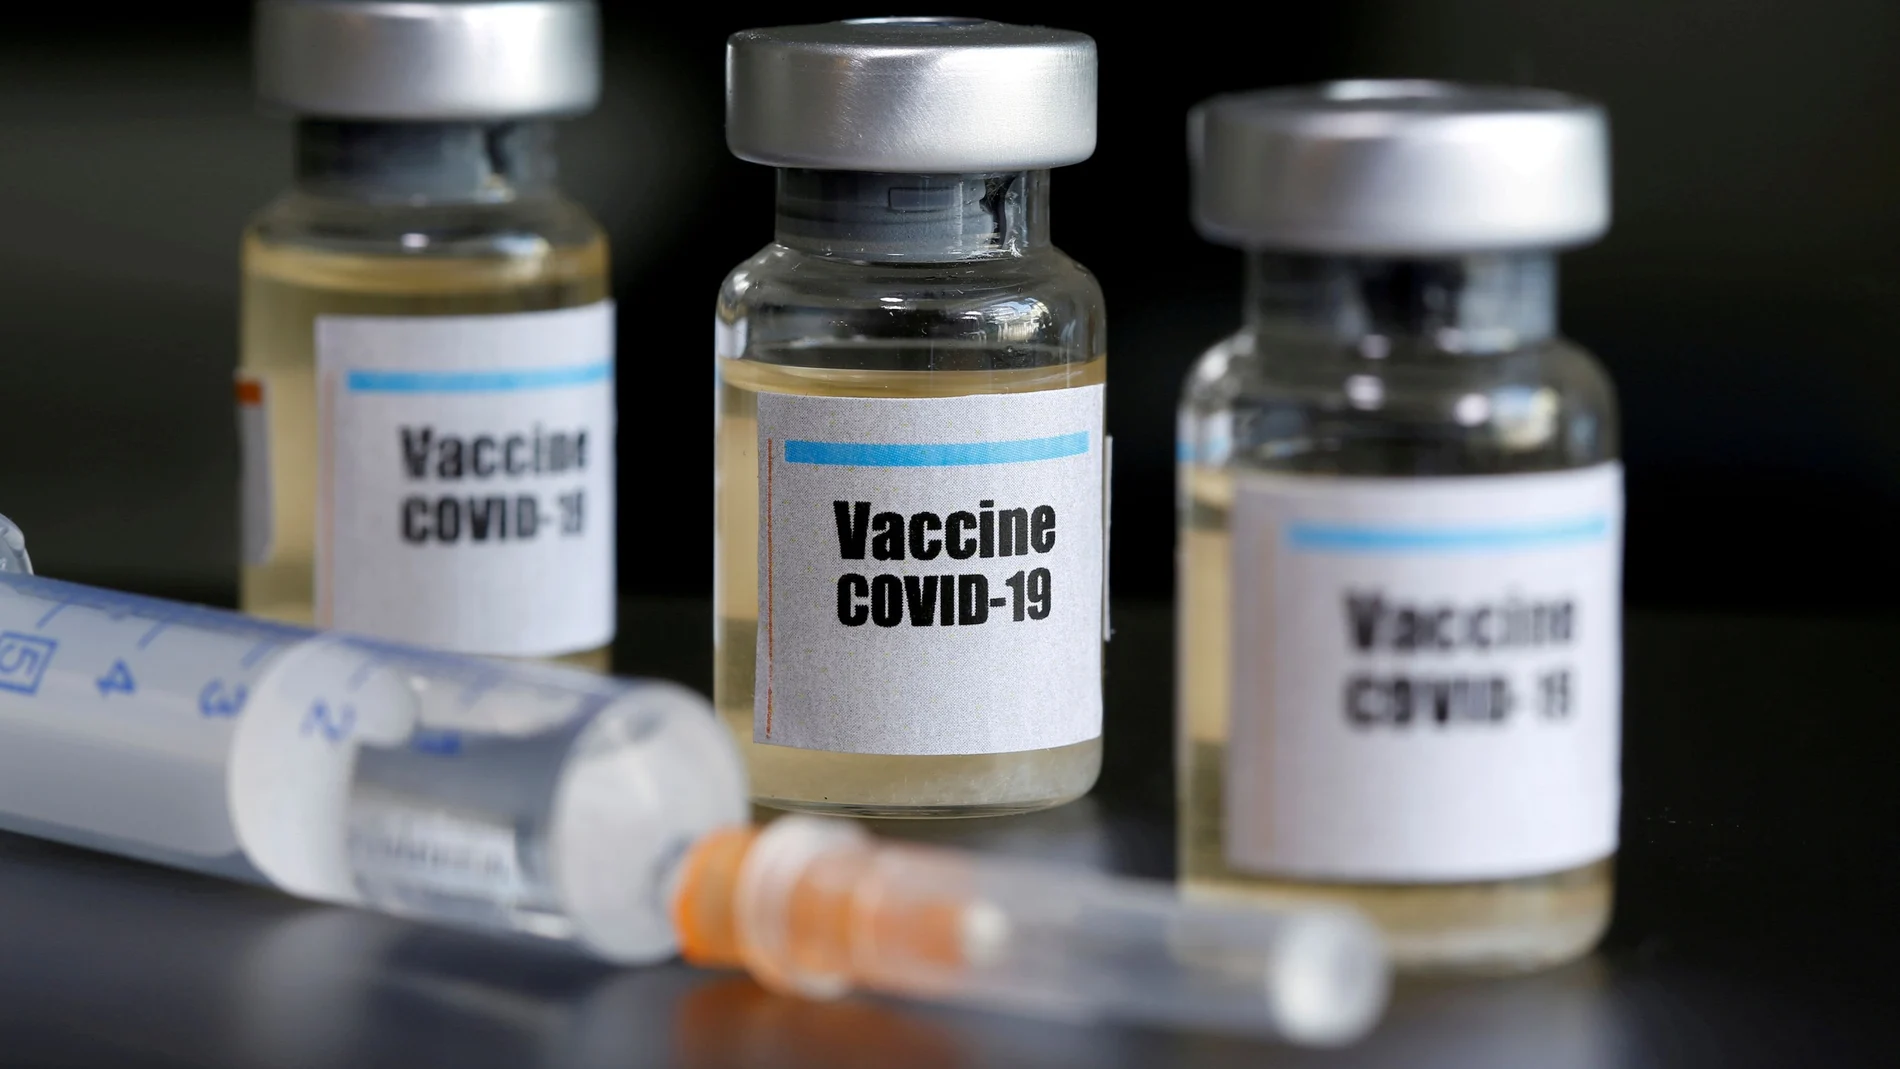 FILE PHOTO: FILE PHOTO: Small bottles labbeled with a "Vaccine COVID-19" sticker and a medical syringe are seen in this illustration